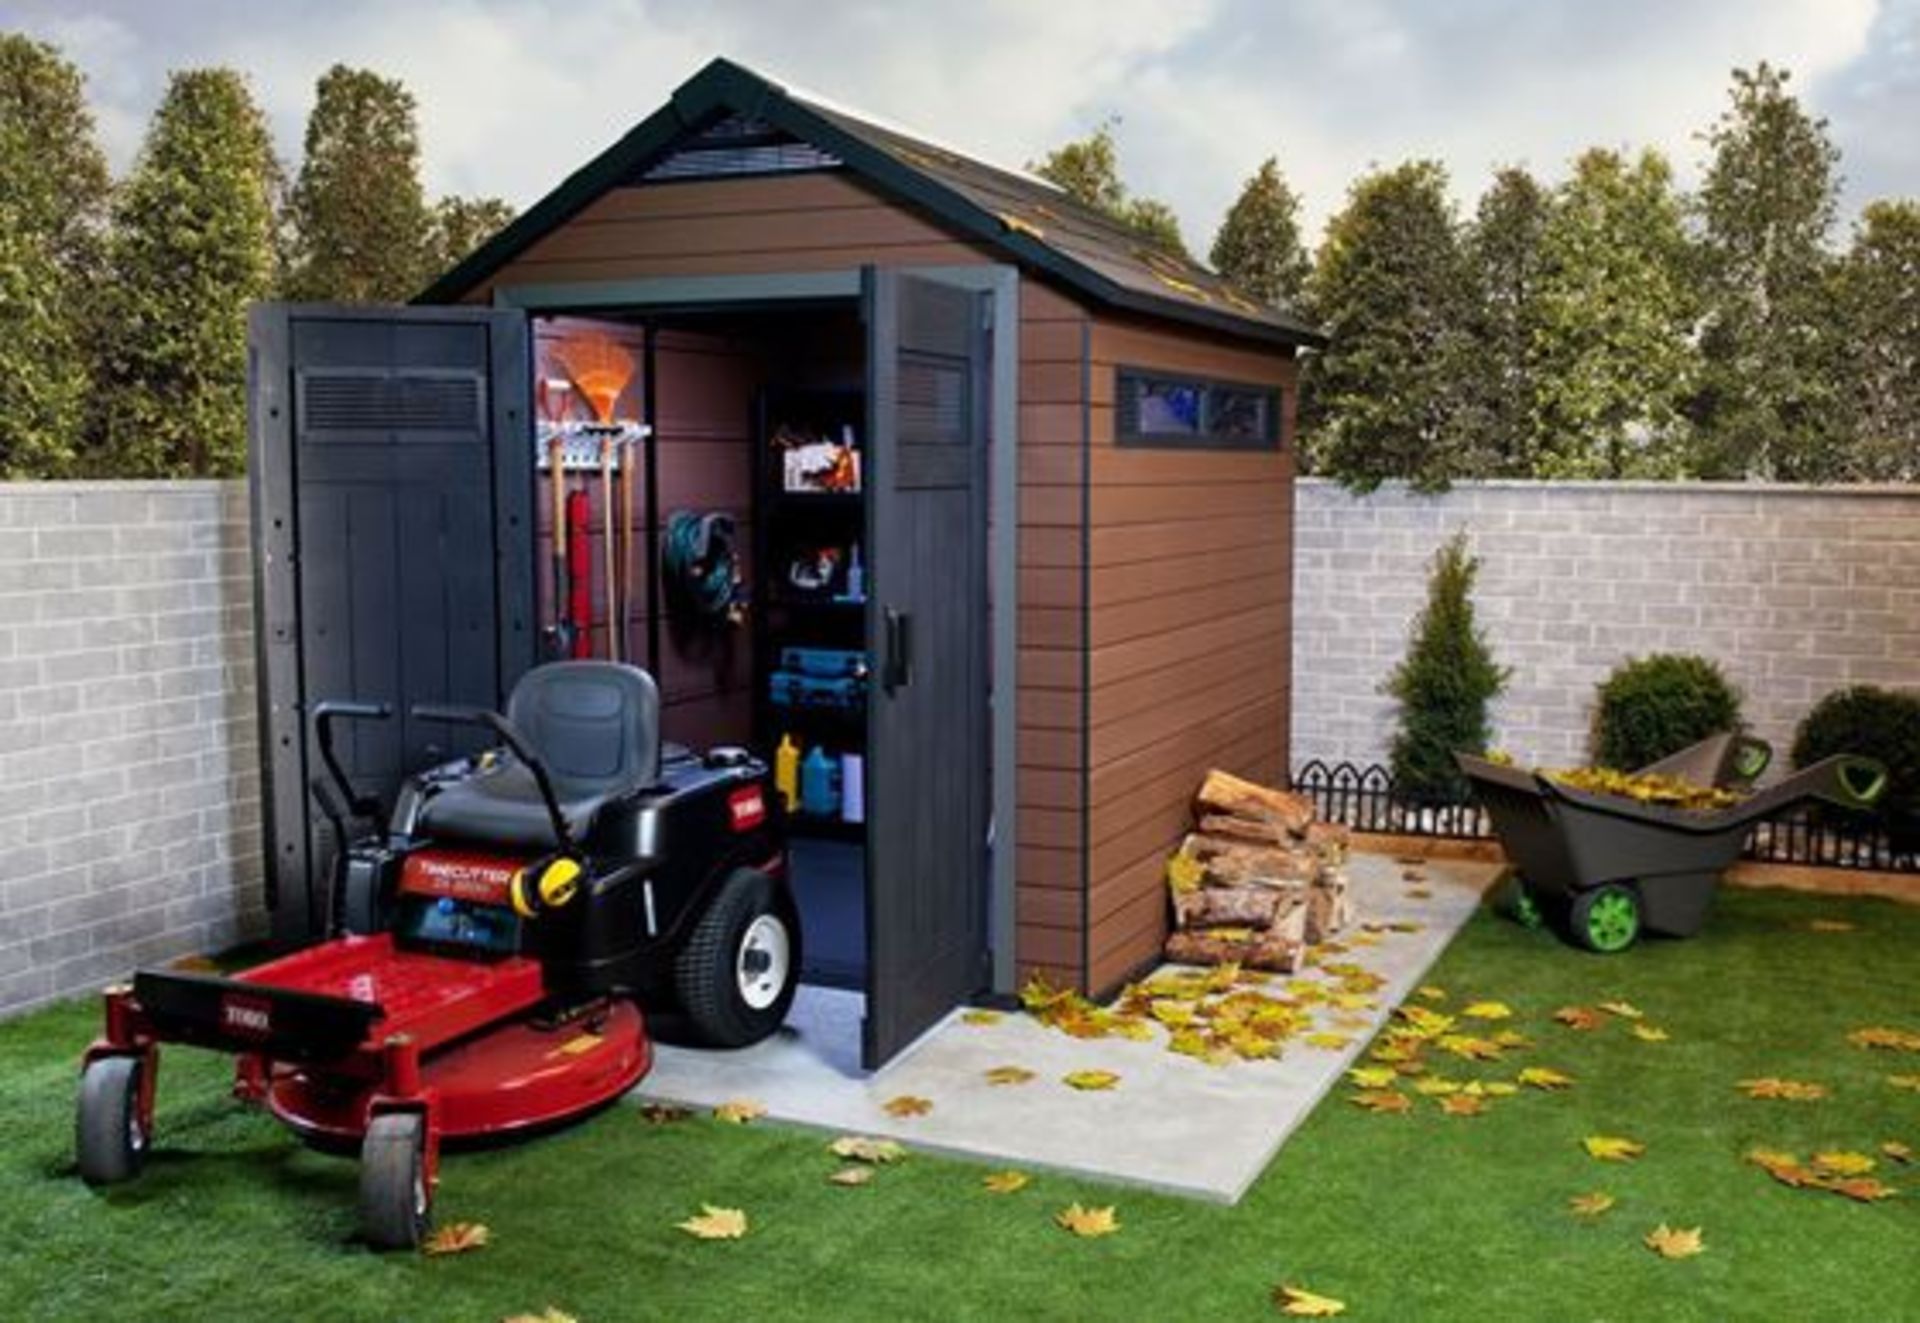 Keter Fusion 757 Garden Shed - Image 3 of 3